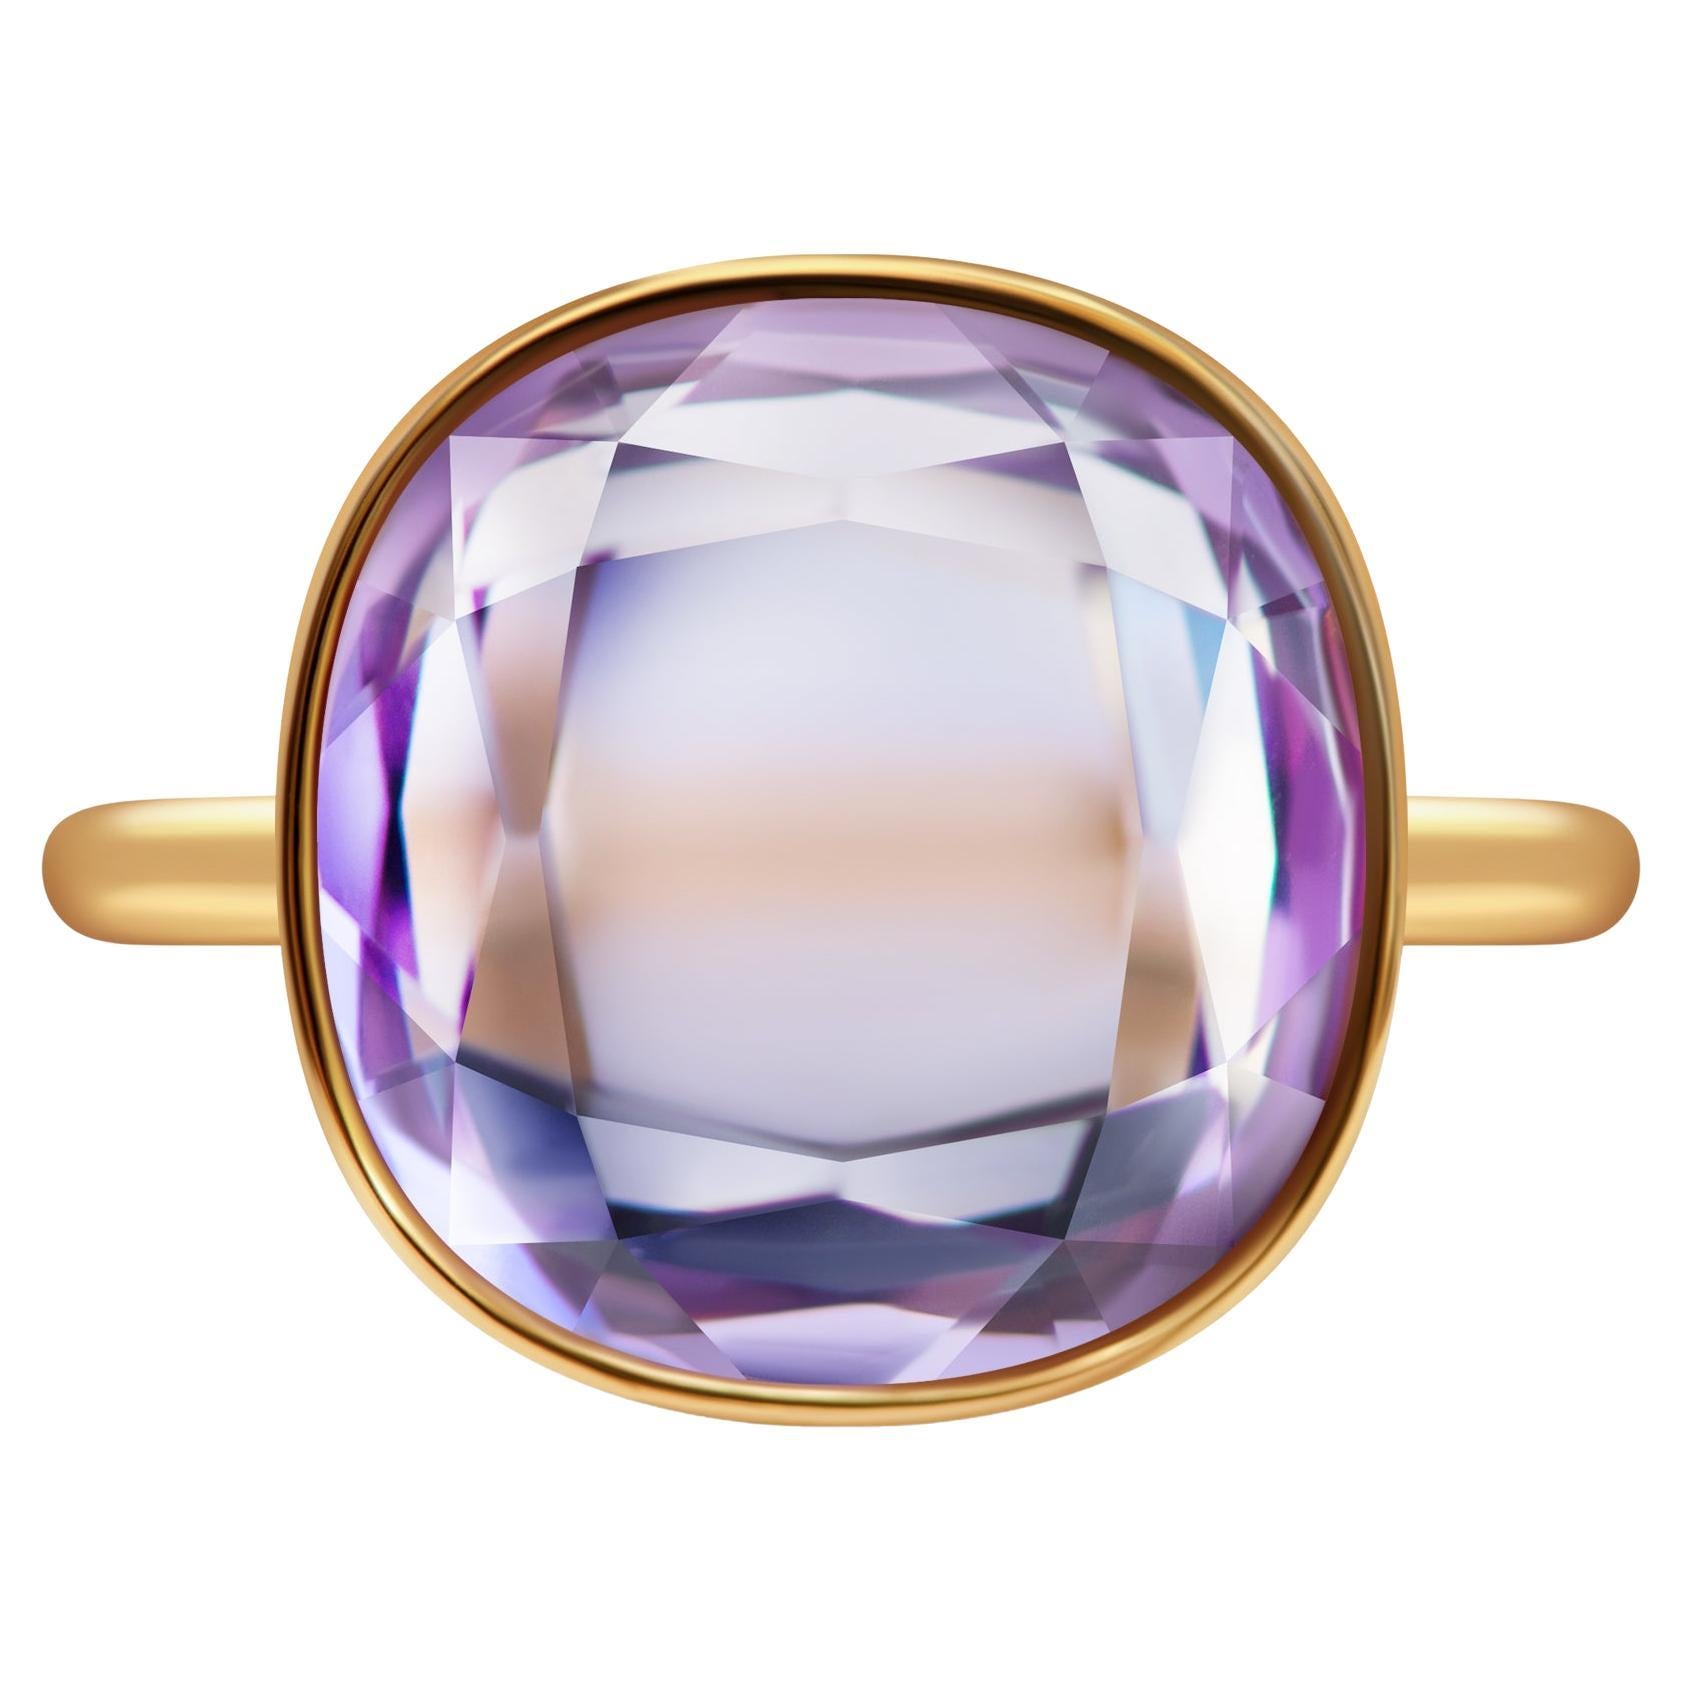 10 Carat Amethyst 18 Karat Yellow Gold Casual Ring "Motion" Collection by D&A